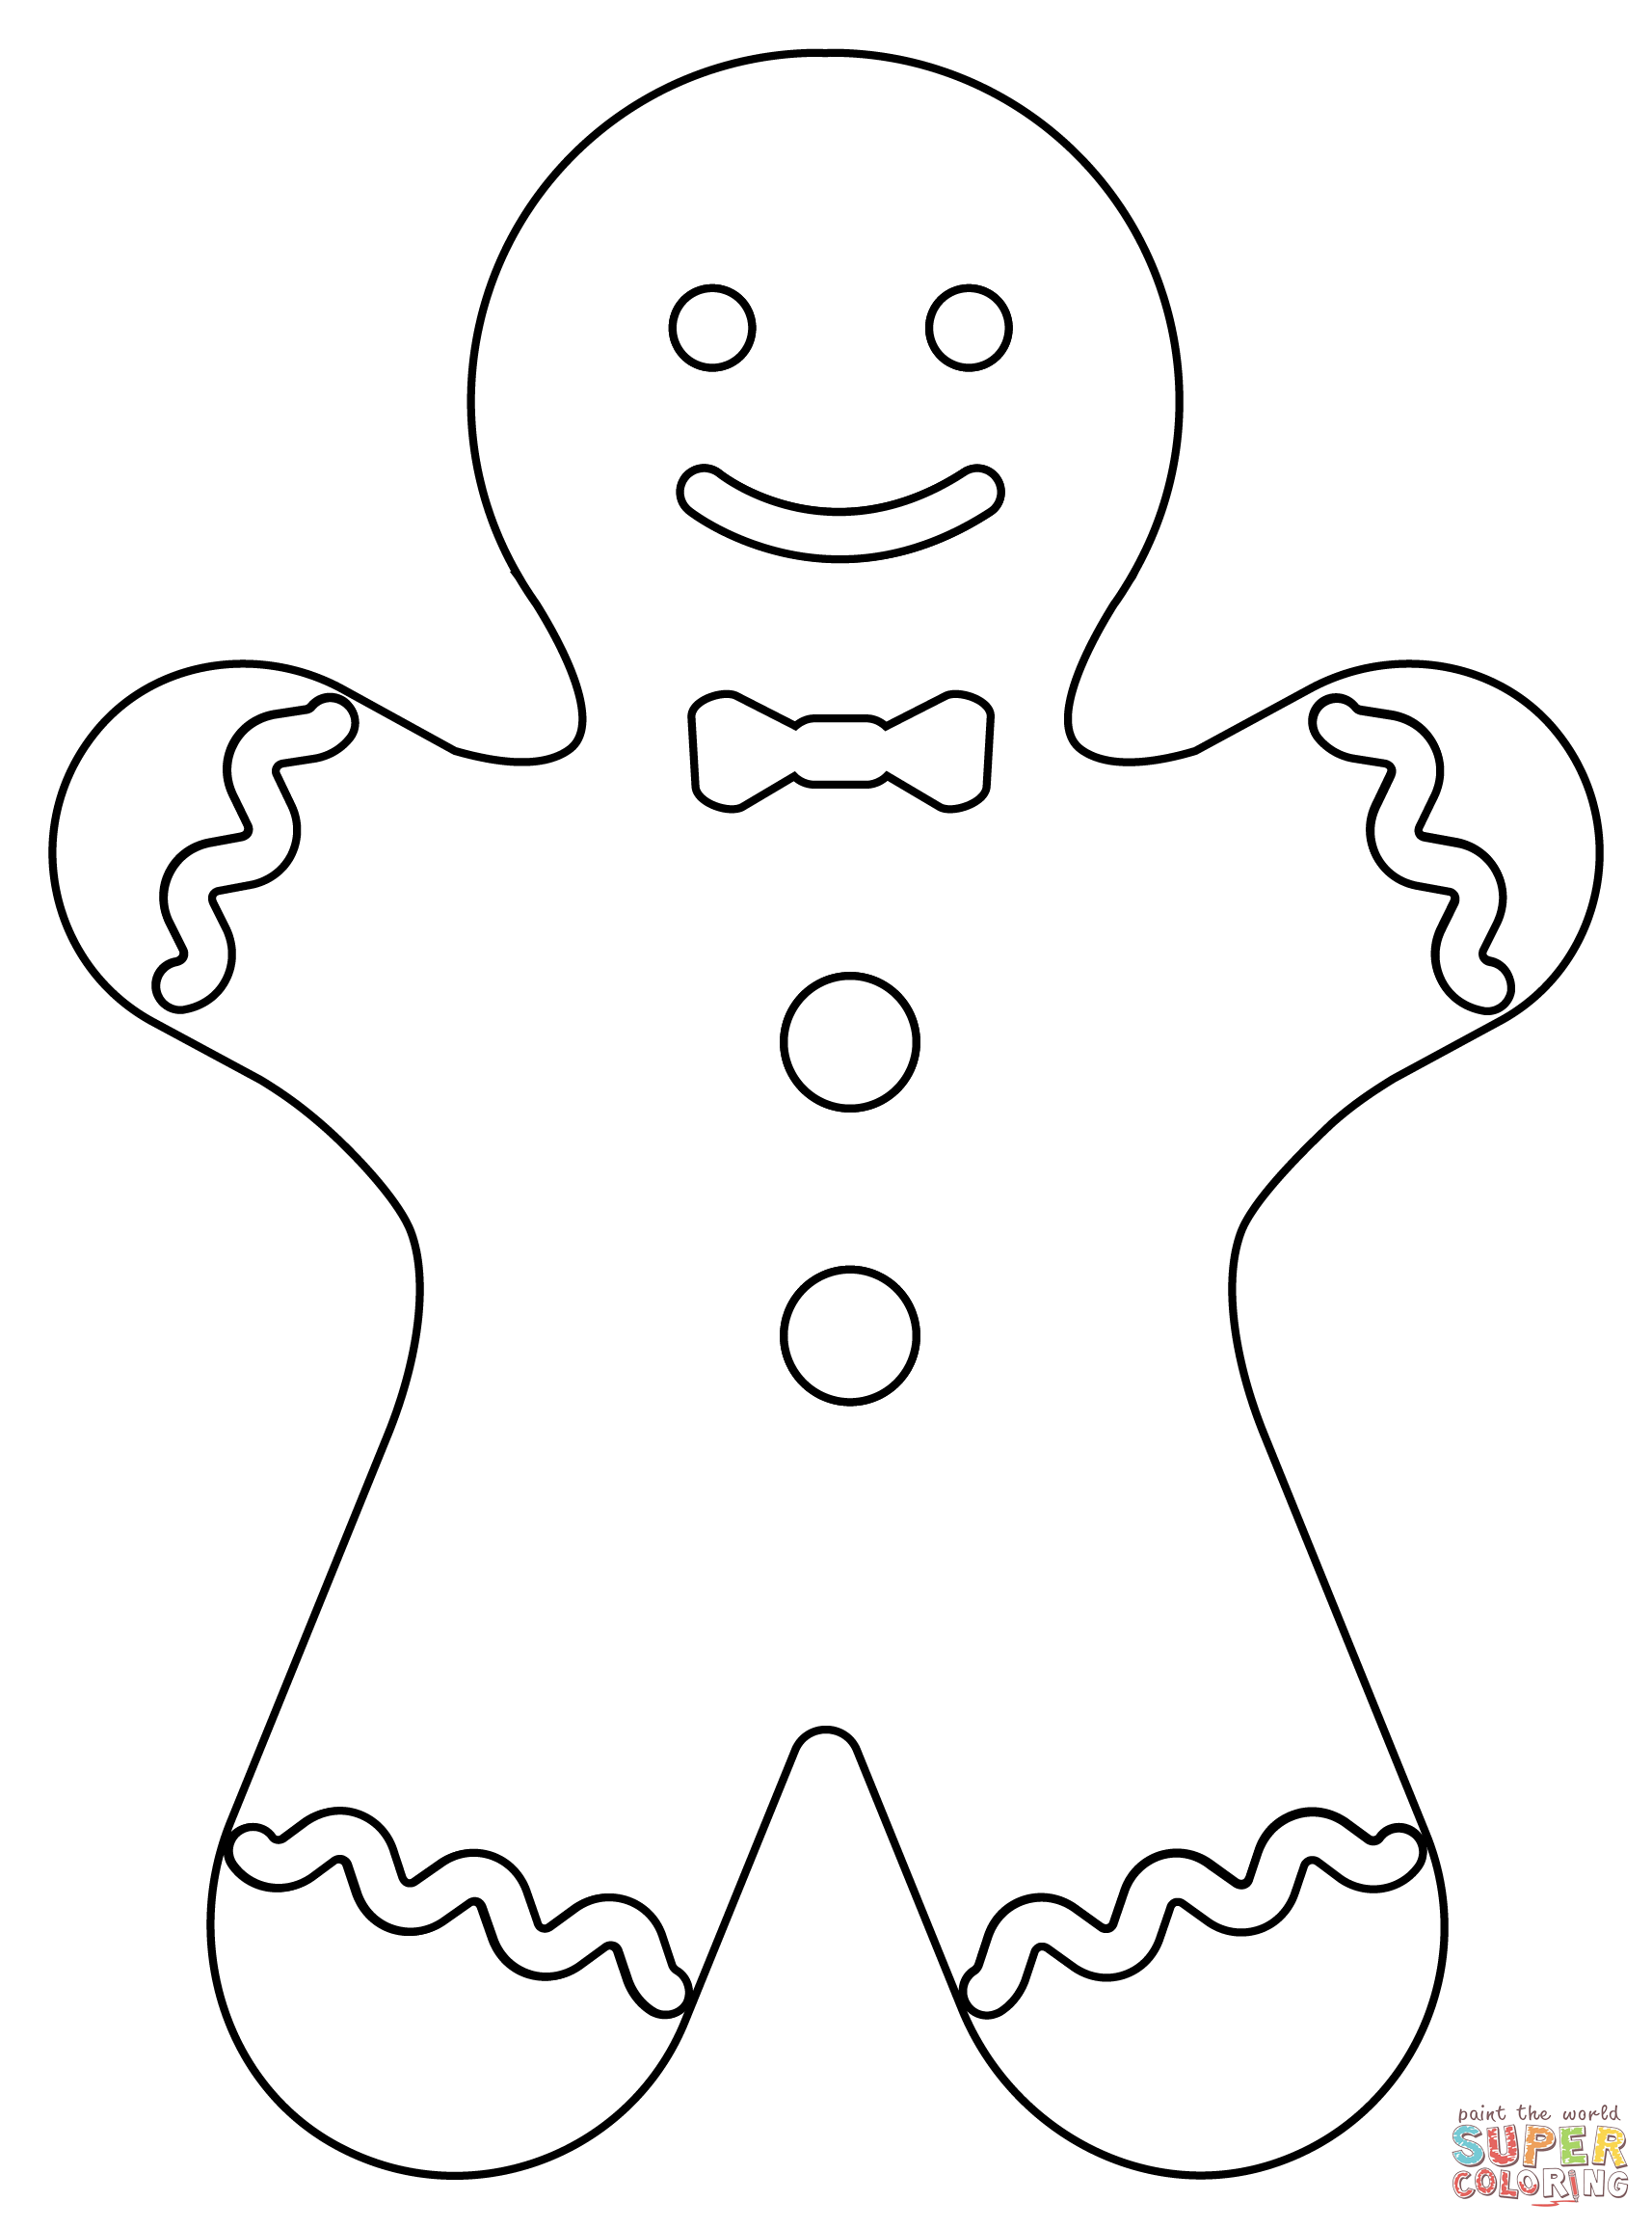 Gingerbread Man coloring page | Free Printable Coloring Pages